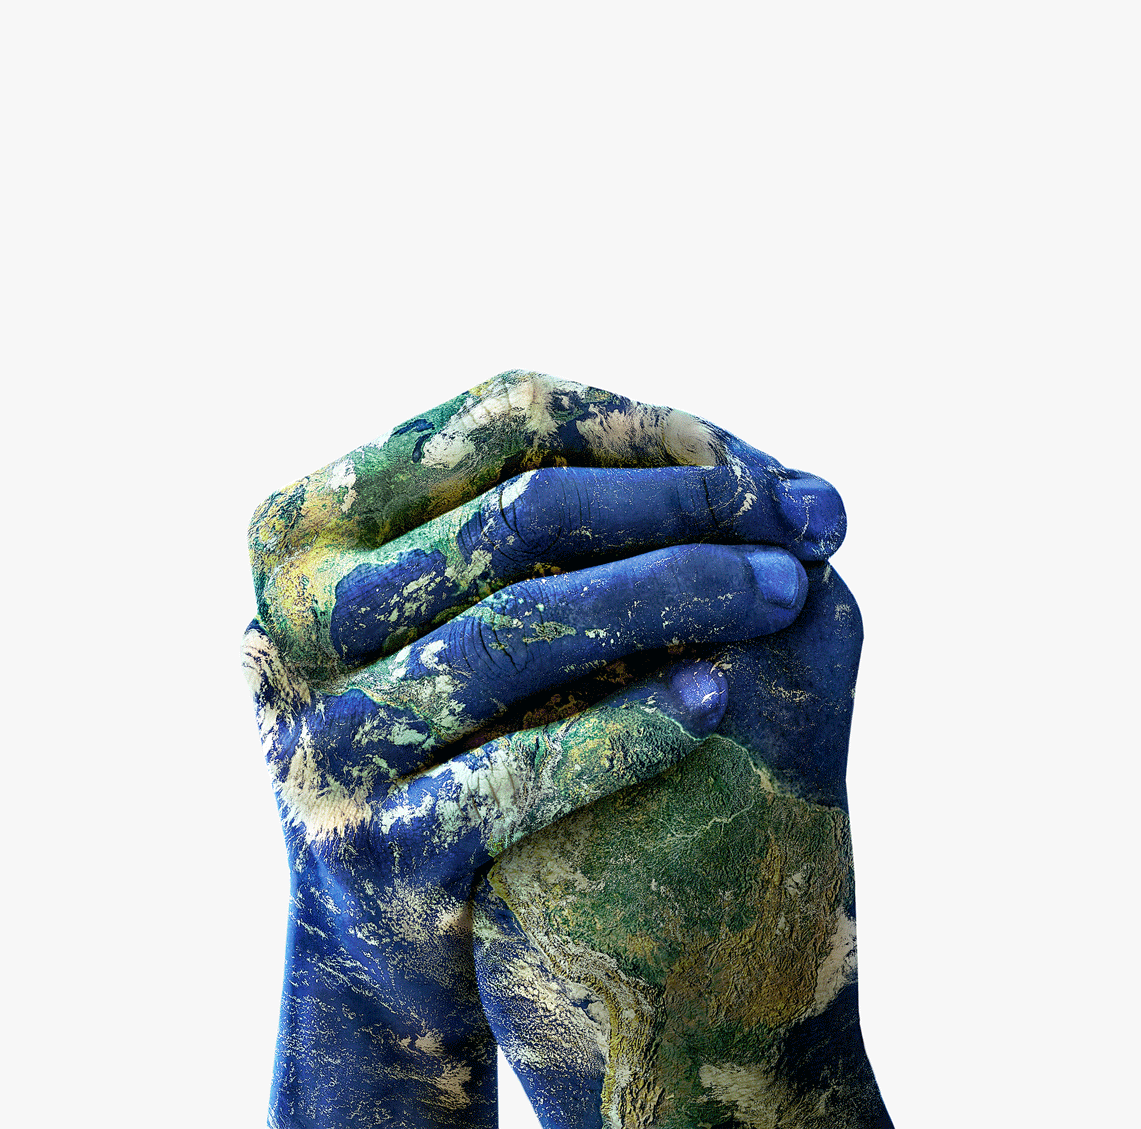 Clasped hands with an image of the Earth